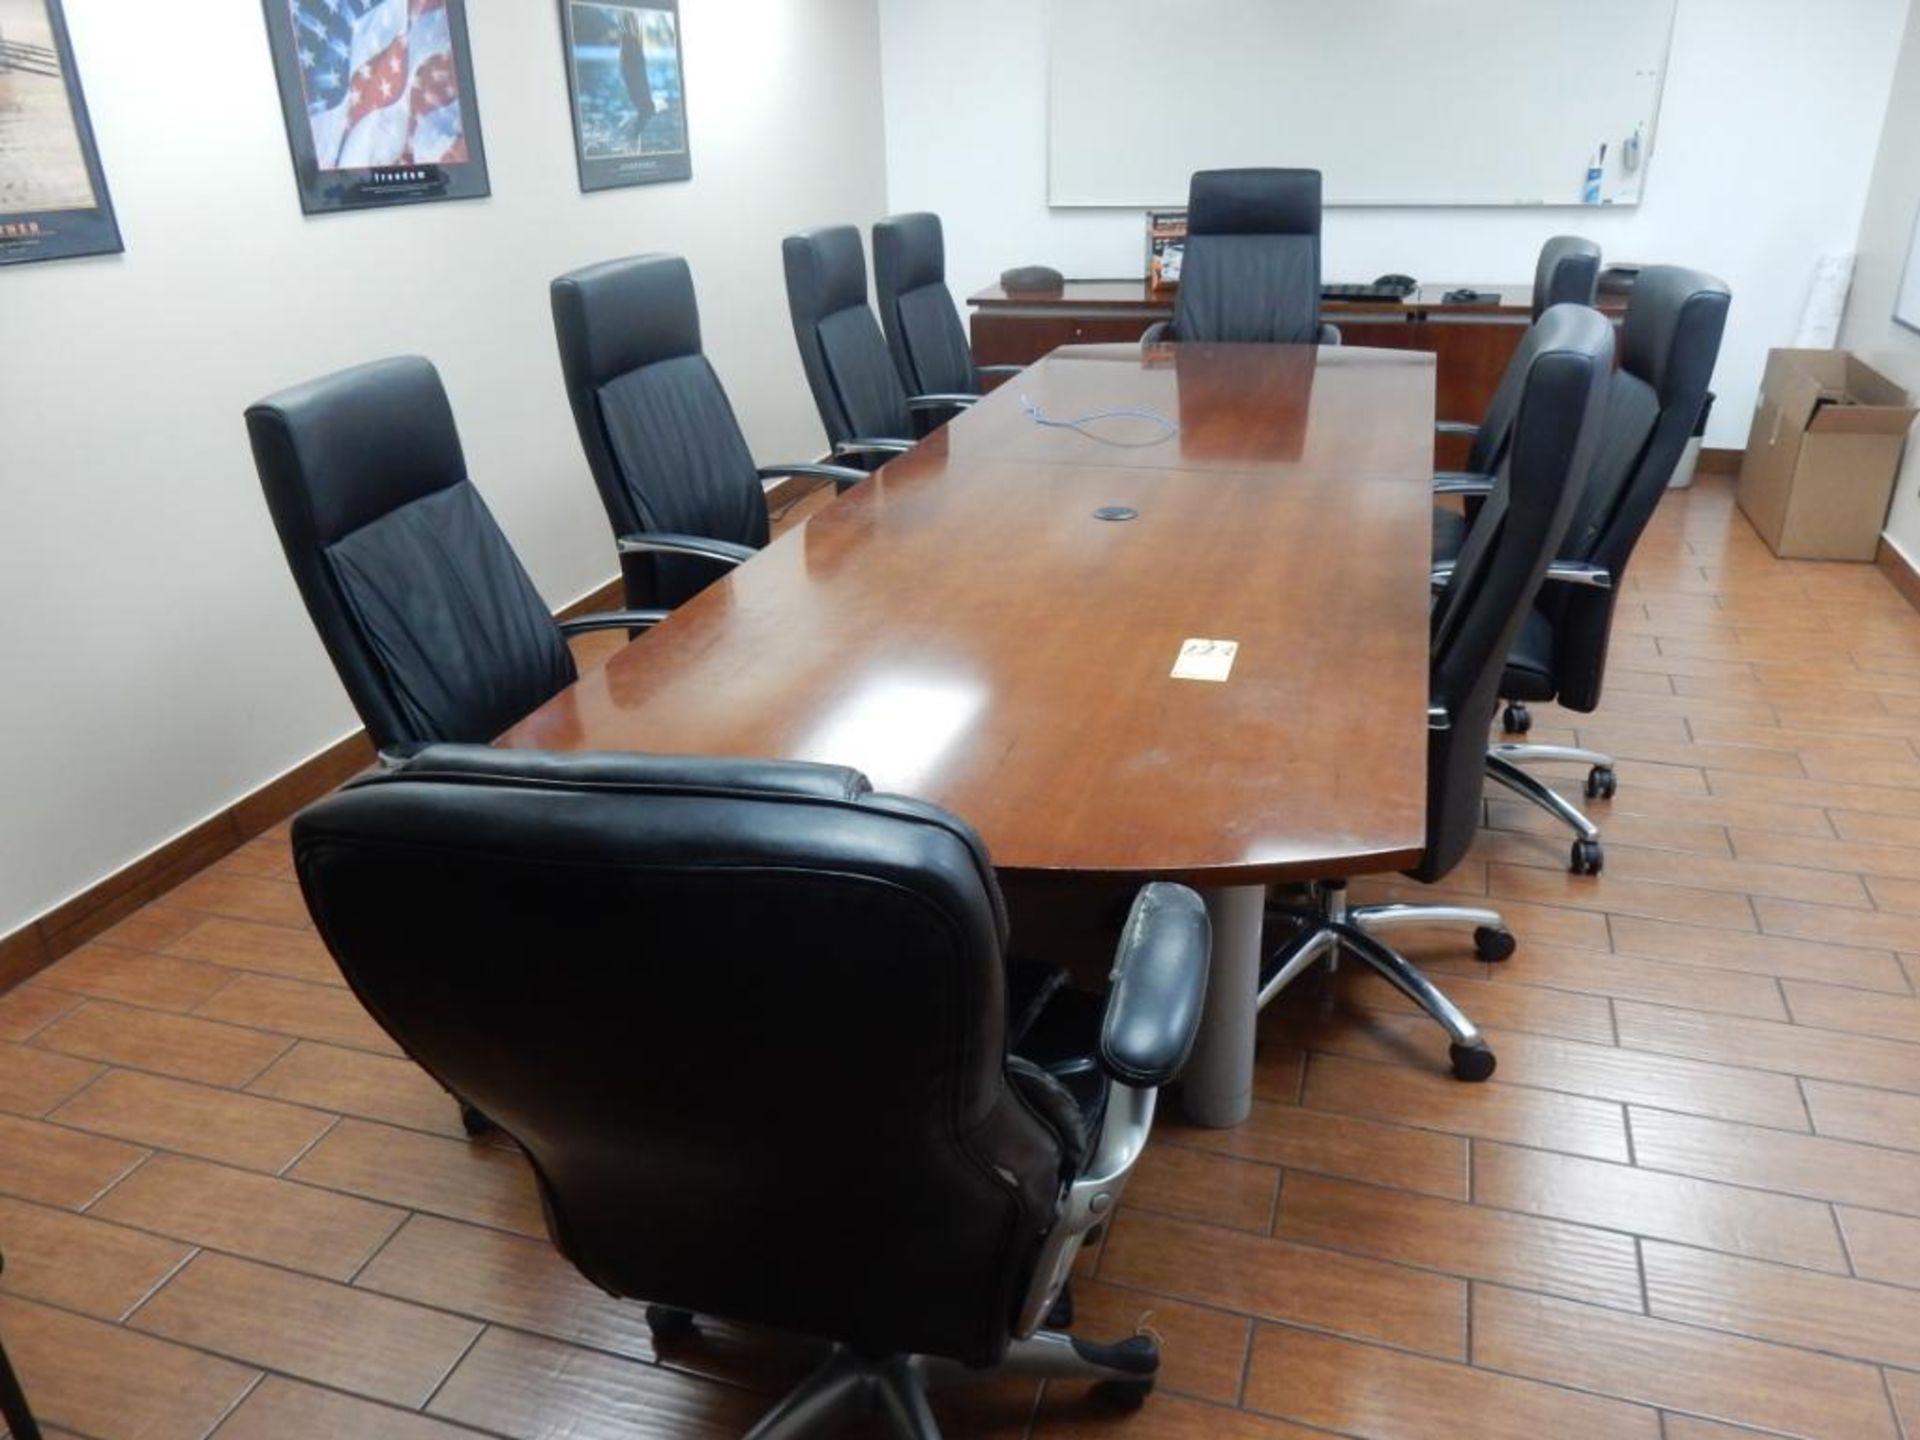 CONTENTS OF CONFERENCE ROOM - 4' X 12' 2-PIECE WOOD CONFERENCE TABLE W/(9) ROLLING CHAIRS, (2) SIDE